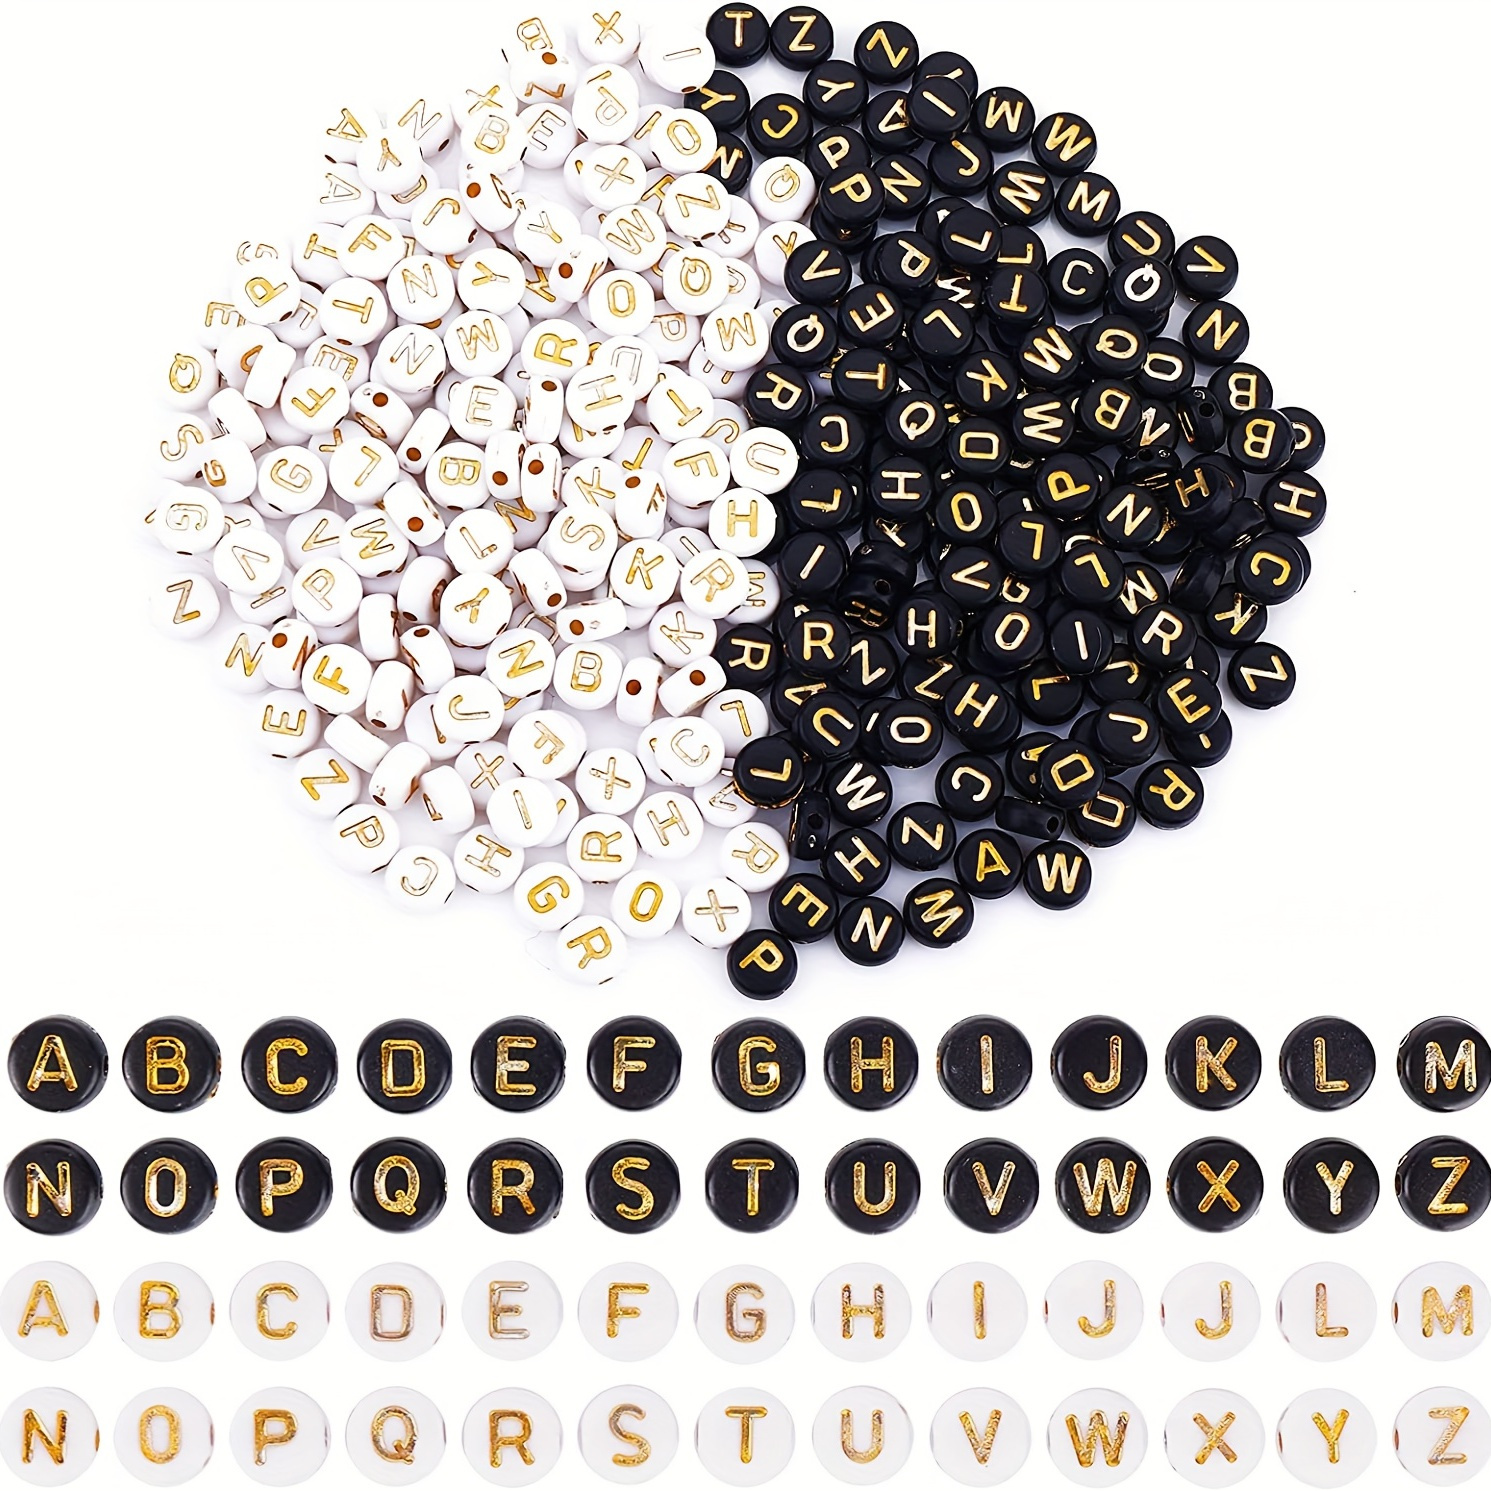 

1000pcs 4x7mm Acrylic A-z Letter Spacer Bulk Golden Letter On Black/white Background Beads For Diy Jewelry Making, Bracelets, Necklaces, Crafts Small Business Supplies